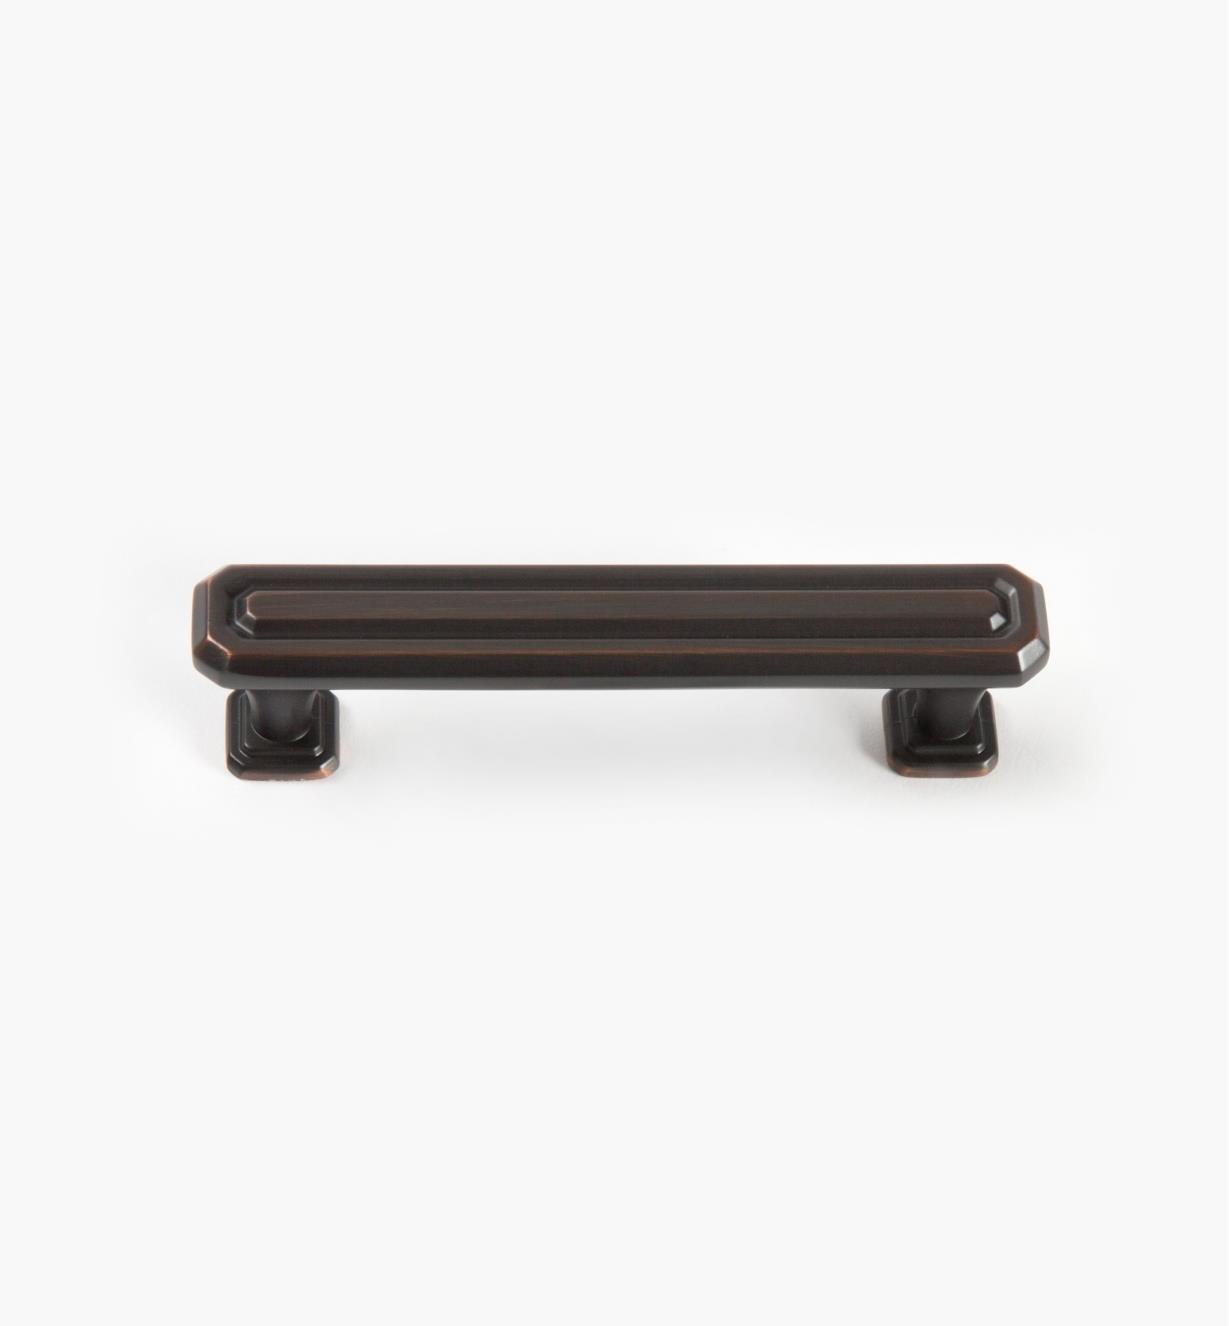 02A1607 - Wells Oil-Rubbed Bronze 96mm x 32mm Handle, each